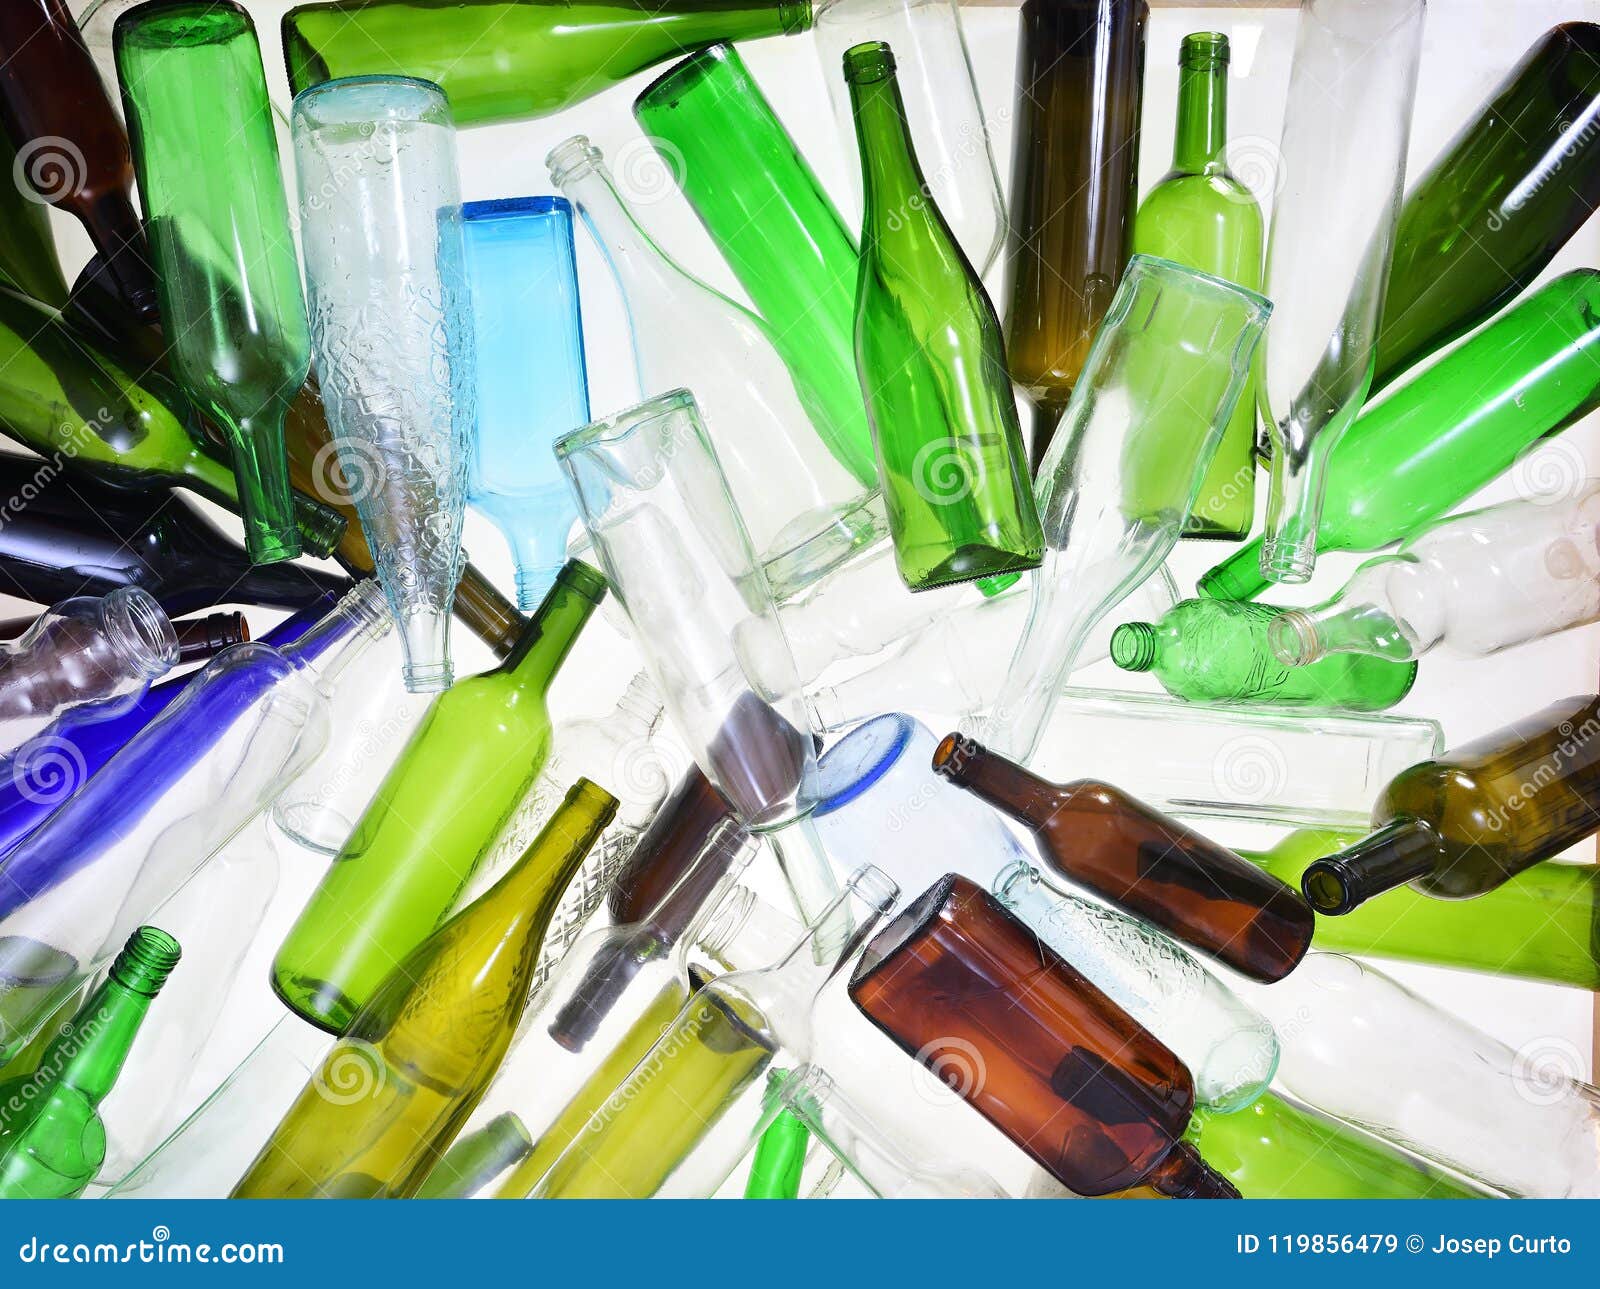 Glass Bottles Prepared For Recycling Stock Photo, Picture and Royalty Free  Image. Image 10587244.